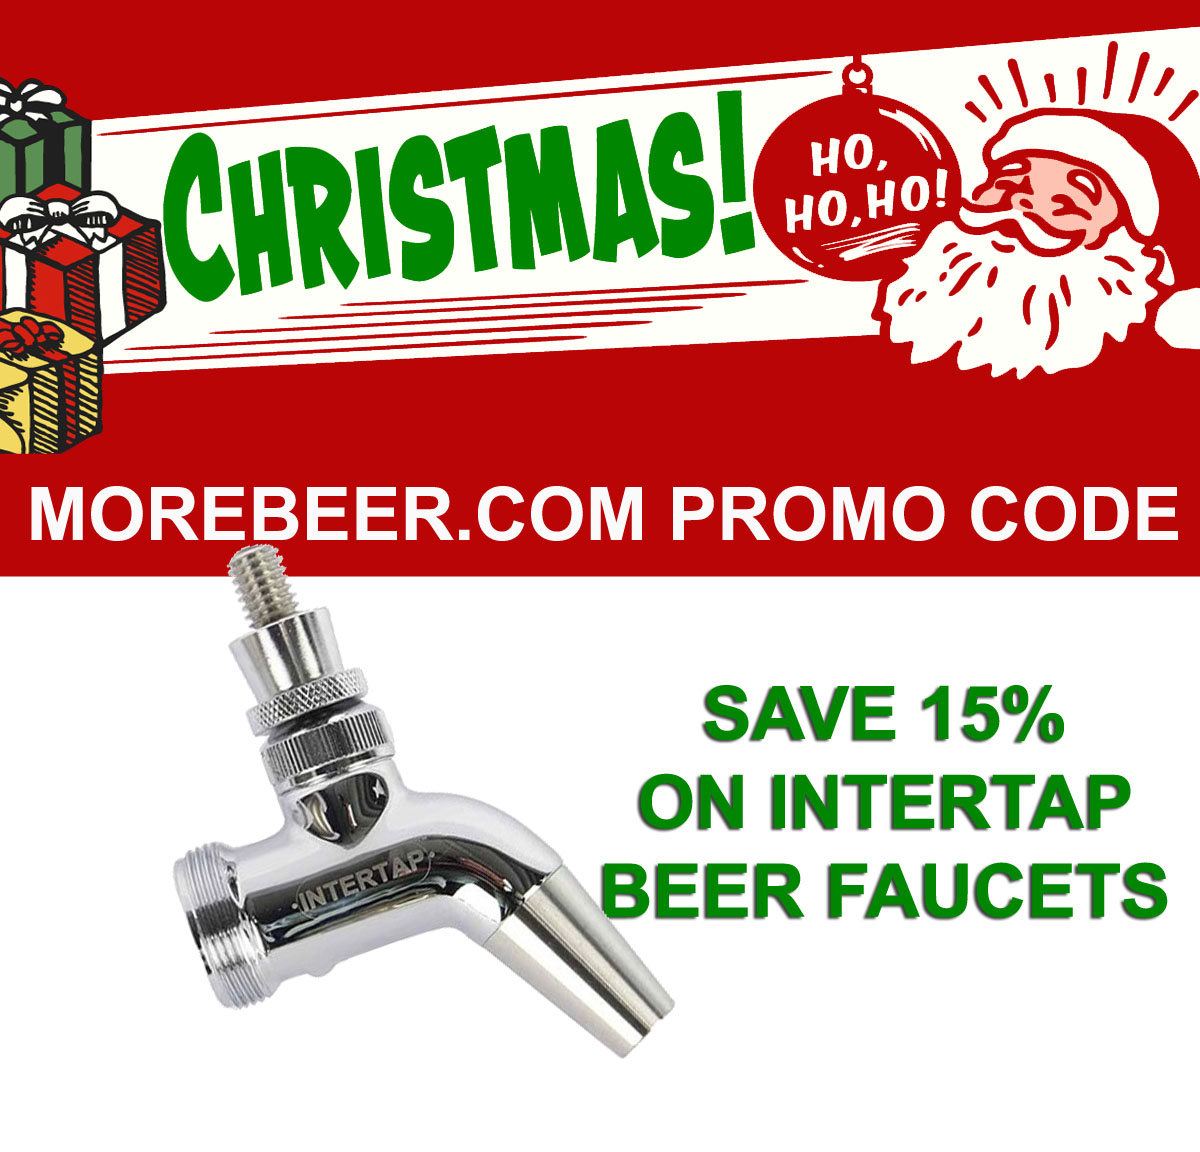  Coupon Code For Save 15% On Intertap Draft Beer Items Including Faucets Coupon Code